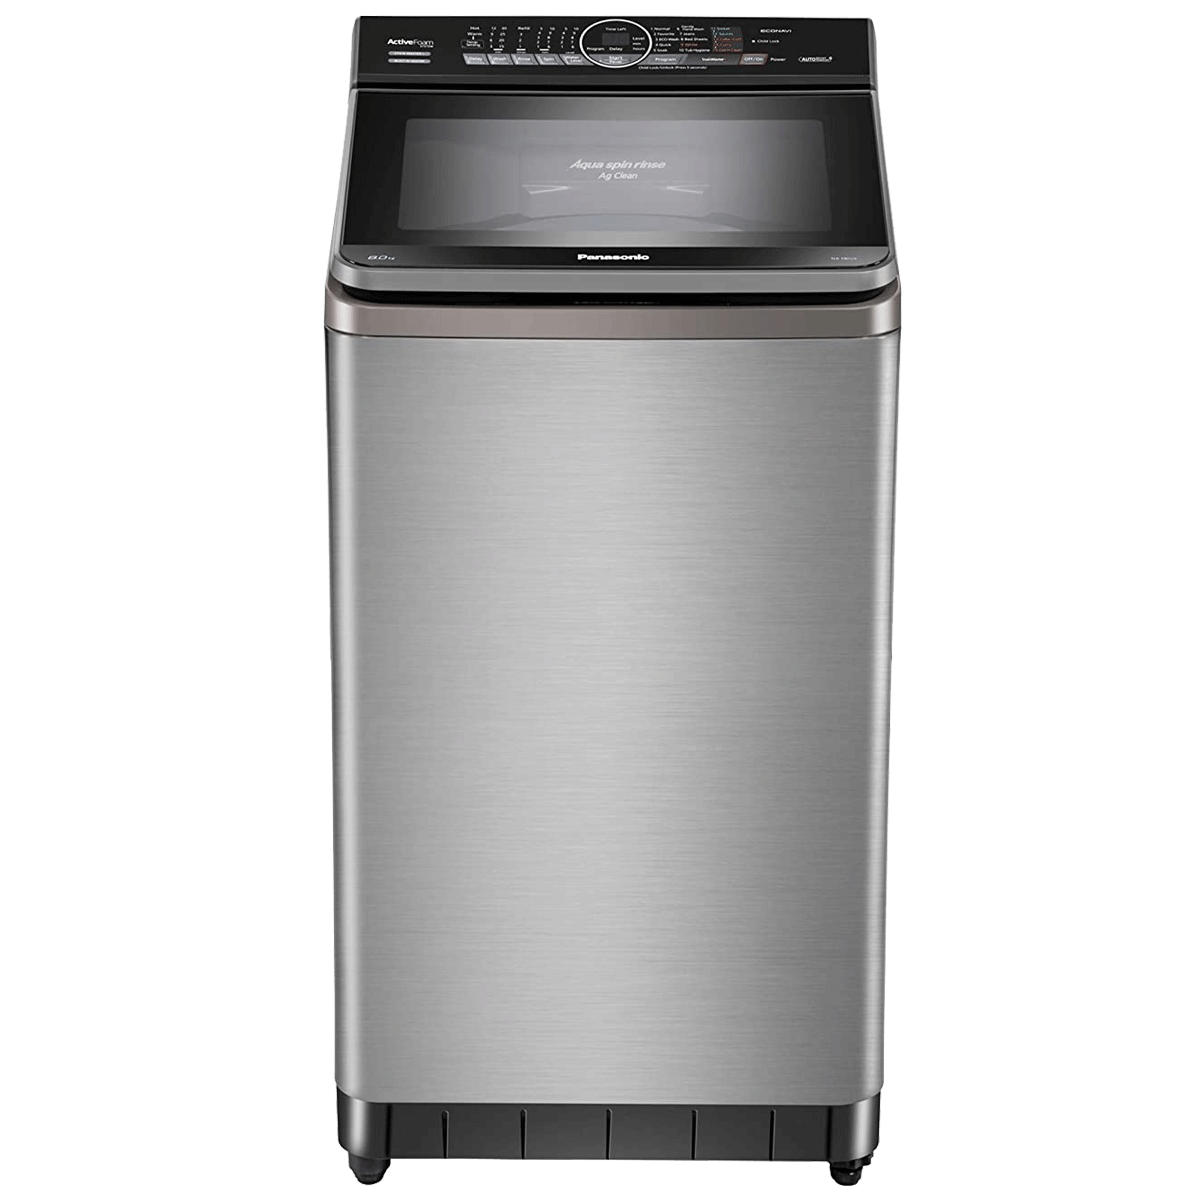 Panasonic 8 kg 5 Star Fully Automatic Top Load Washing Machine (Aqua Spin Rinse, NA-F80V9SRB, Stainless Steel)_1